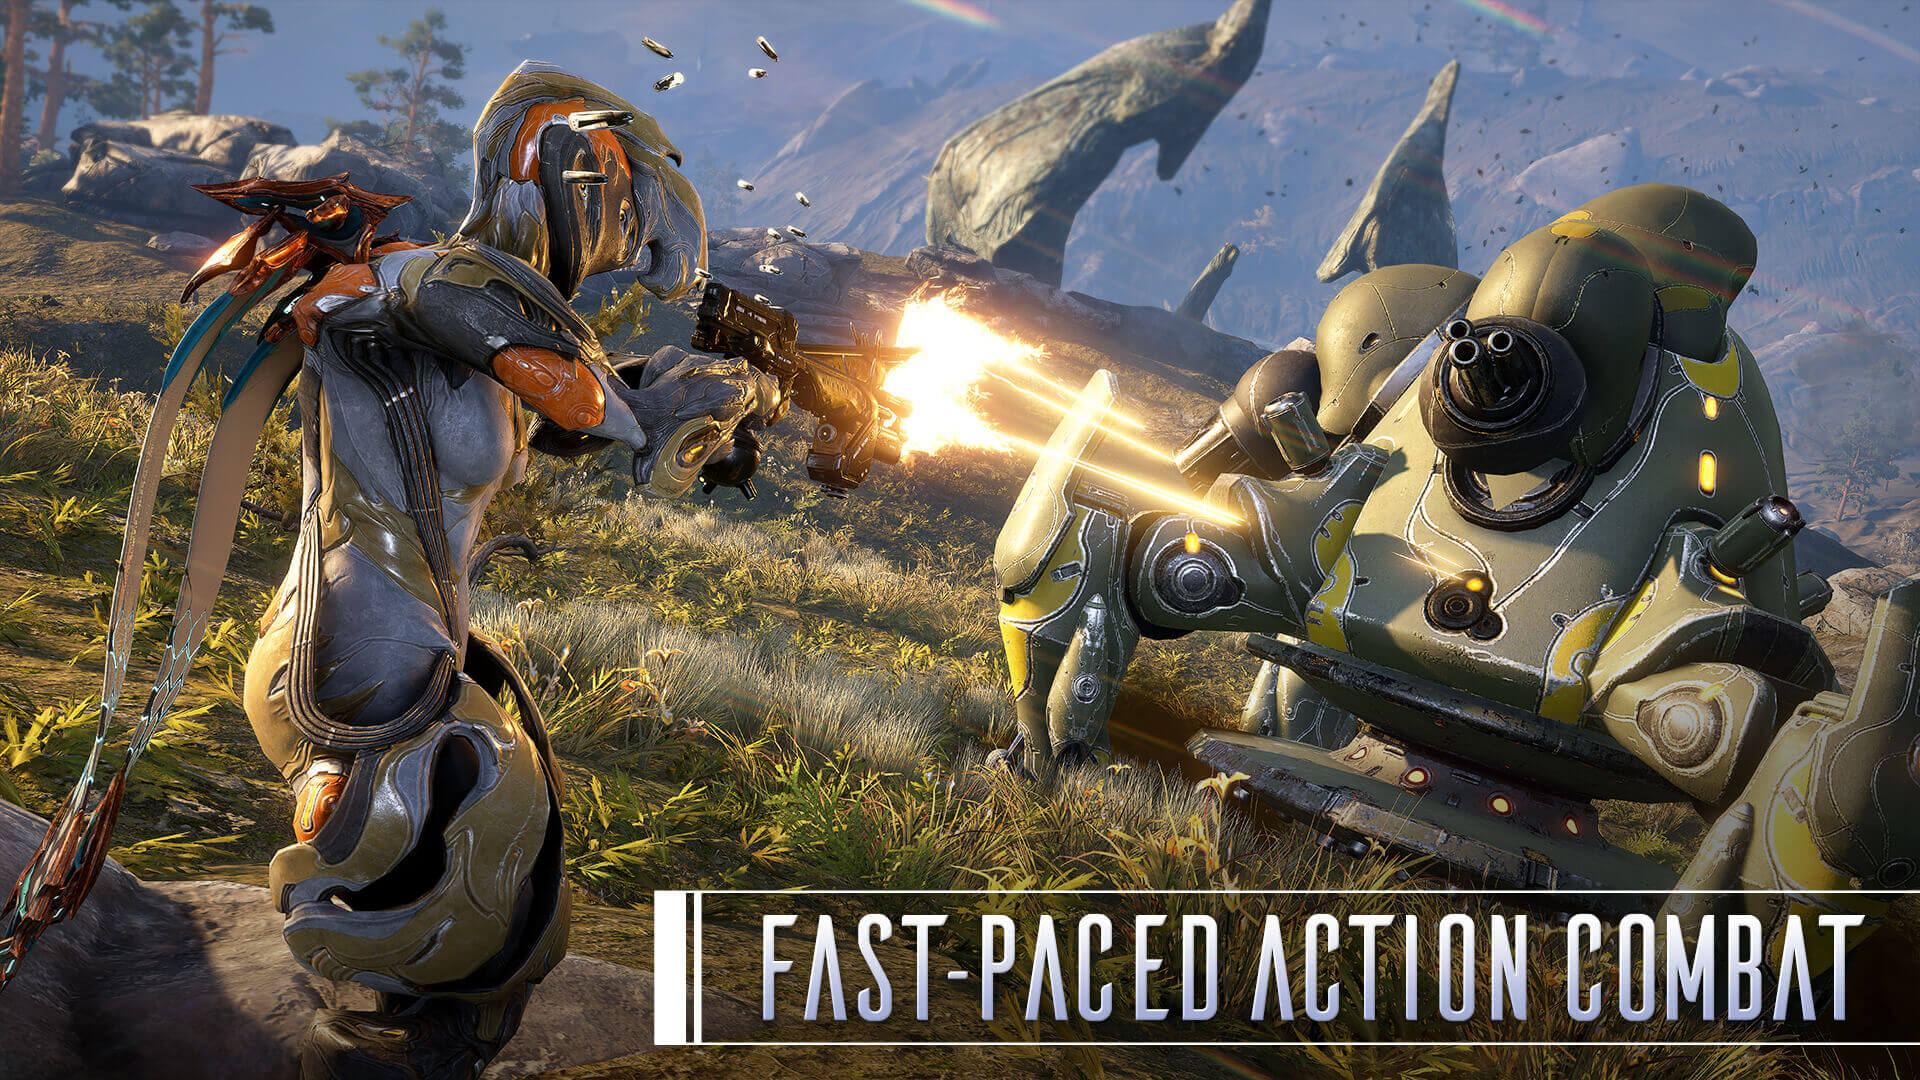 Fast-Paced Action Combat